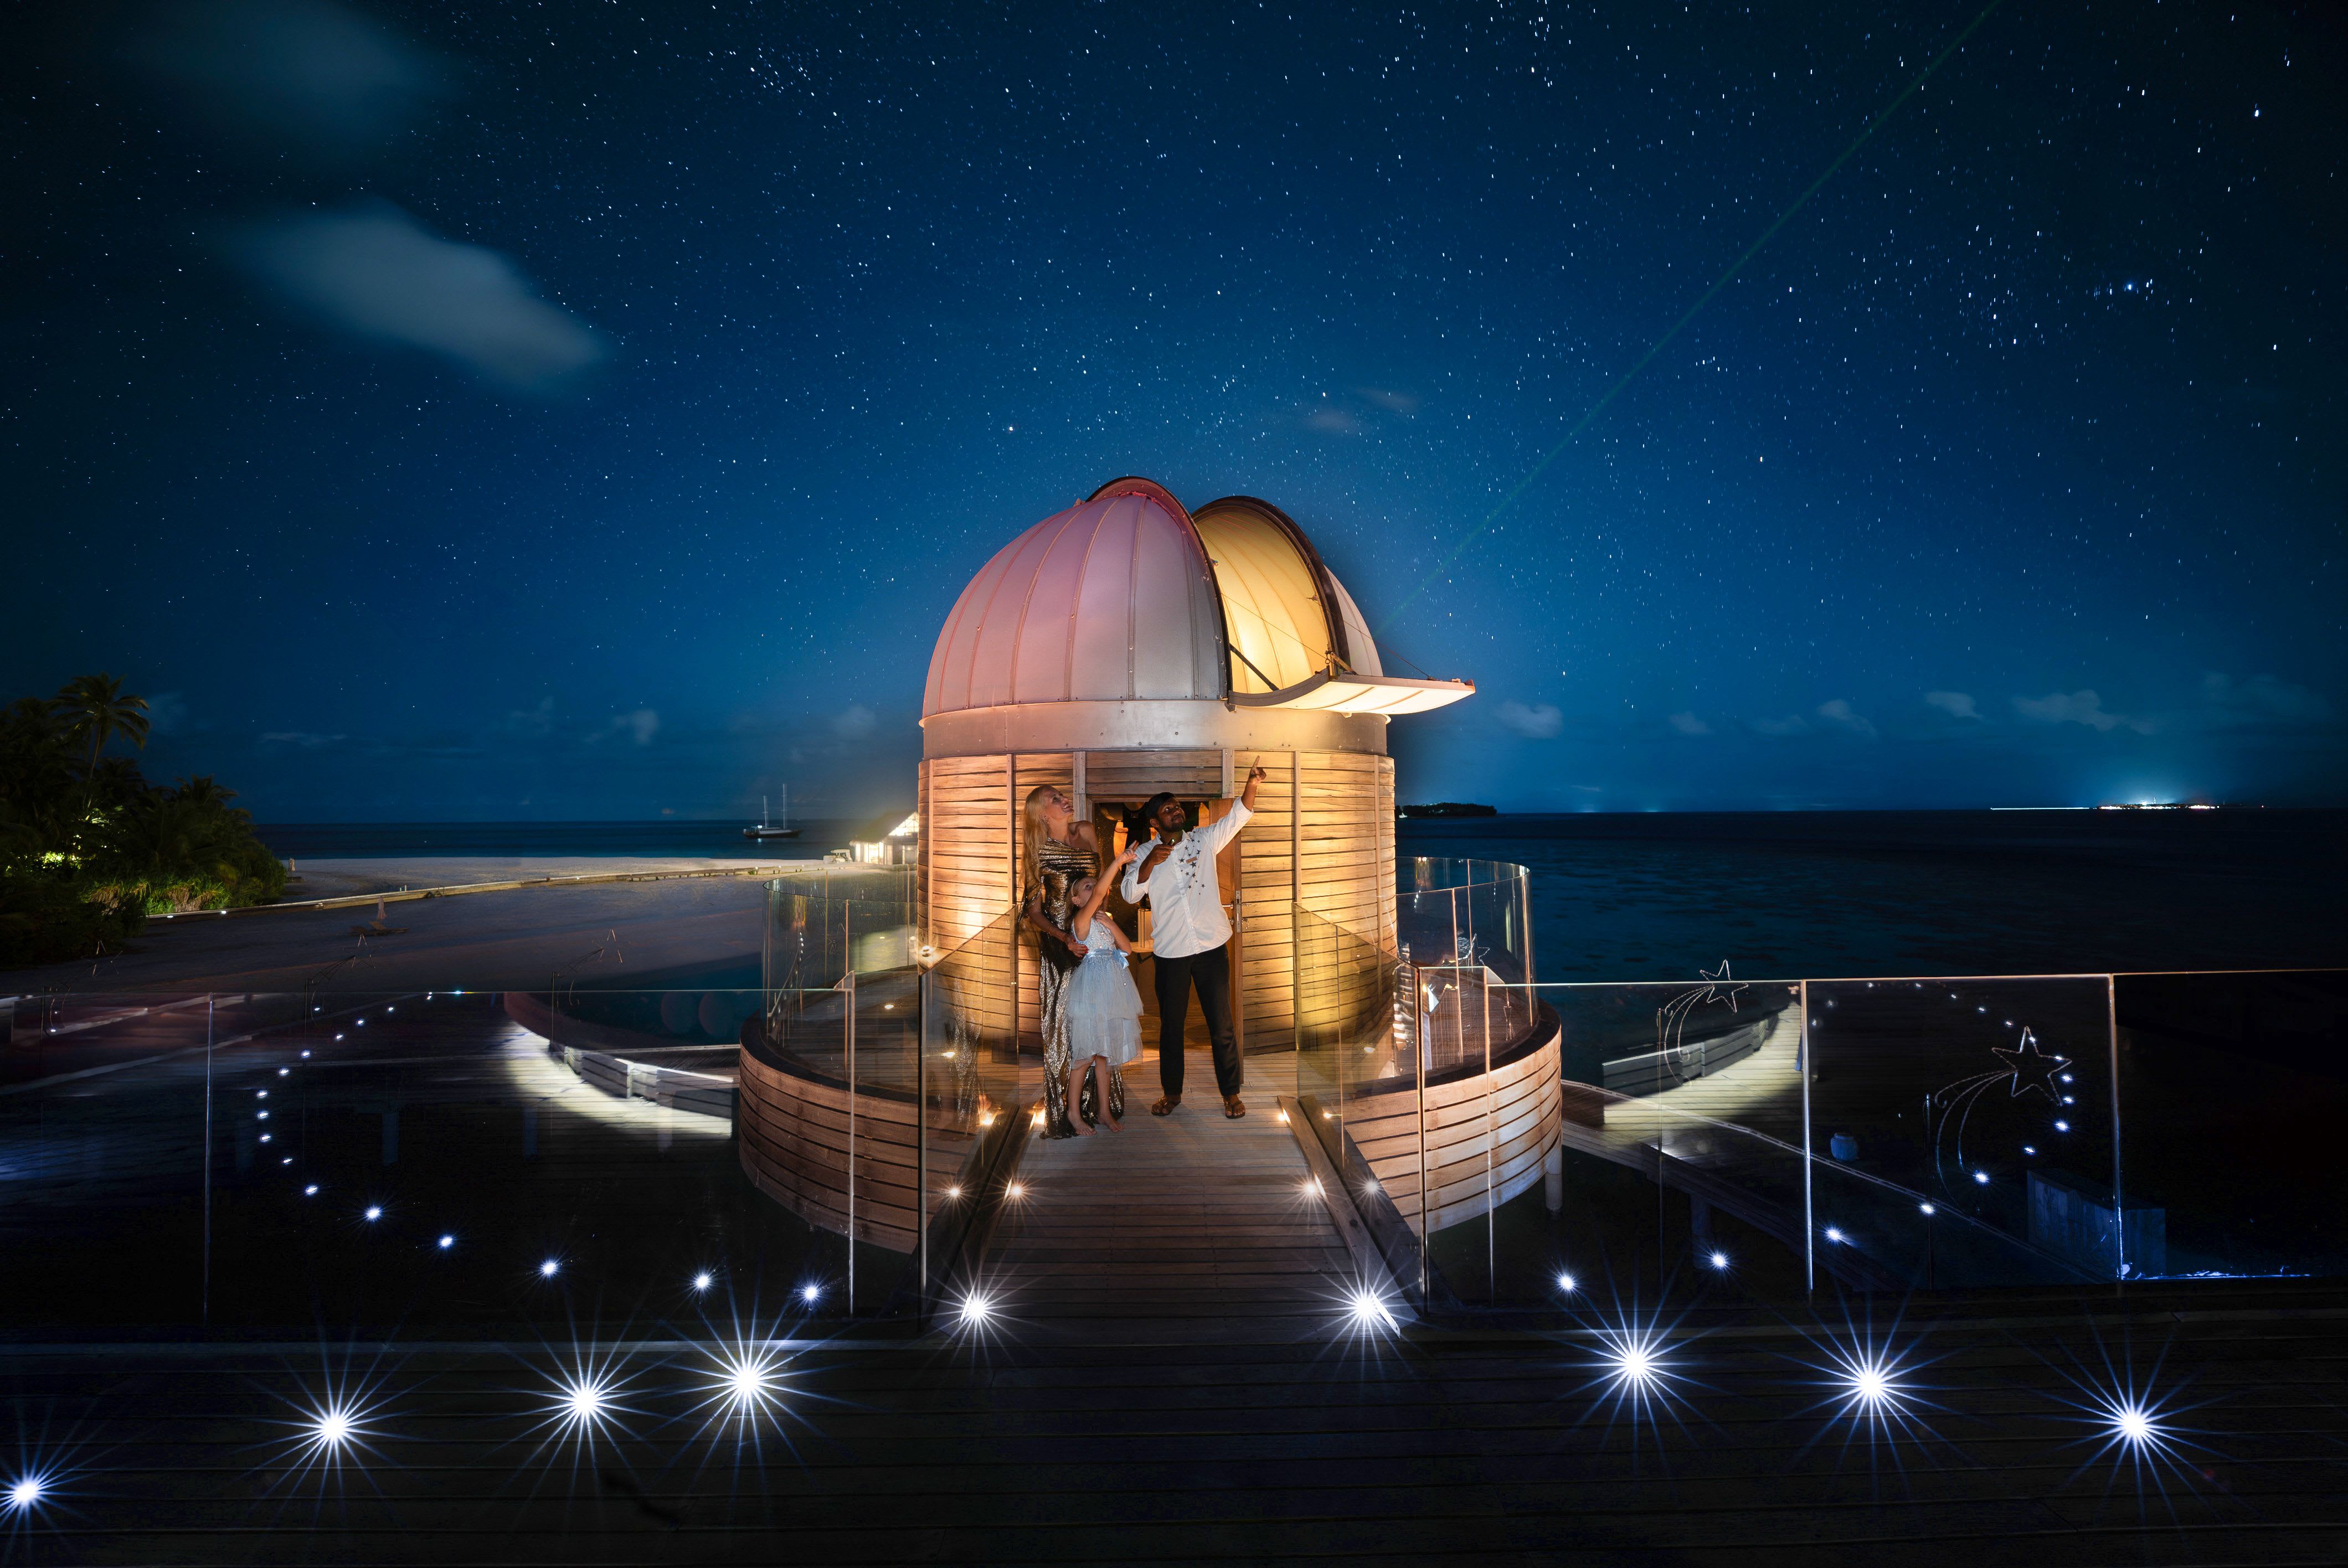 A SKY Guru guiding two guests on a stargazing experience.